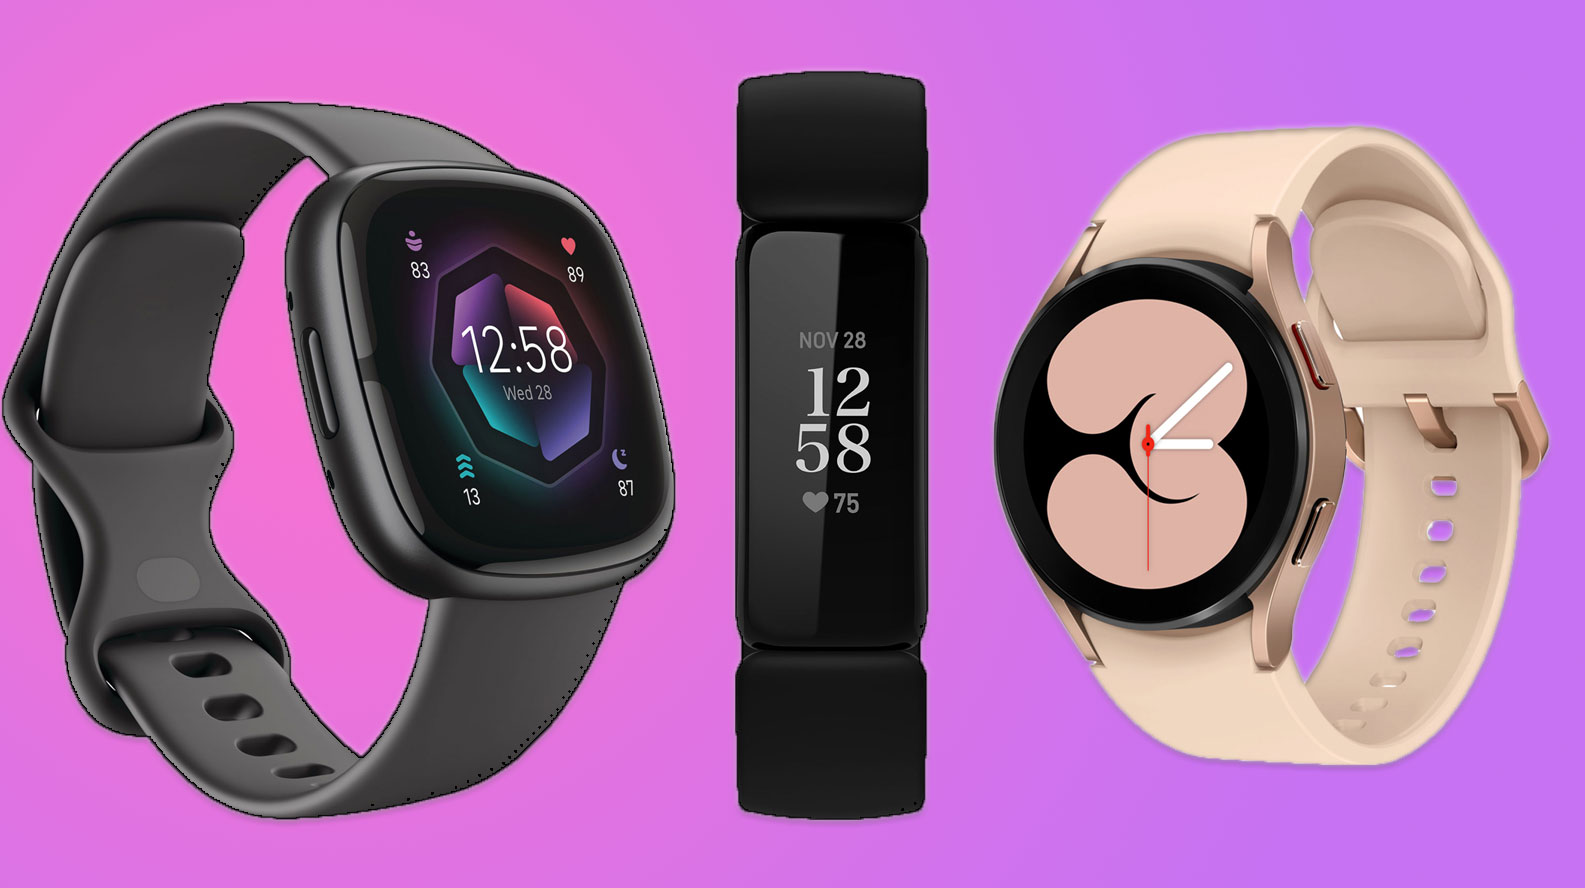 Best Buy’s Boxing Day sale offers discounts on several wearables